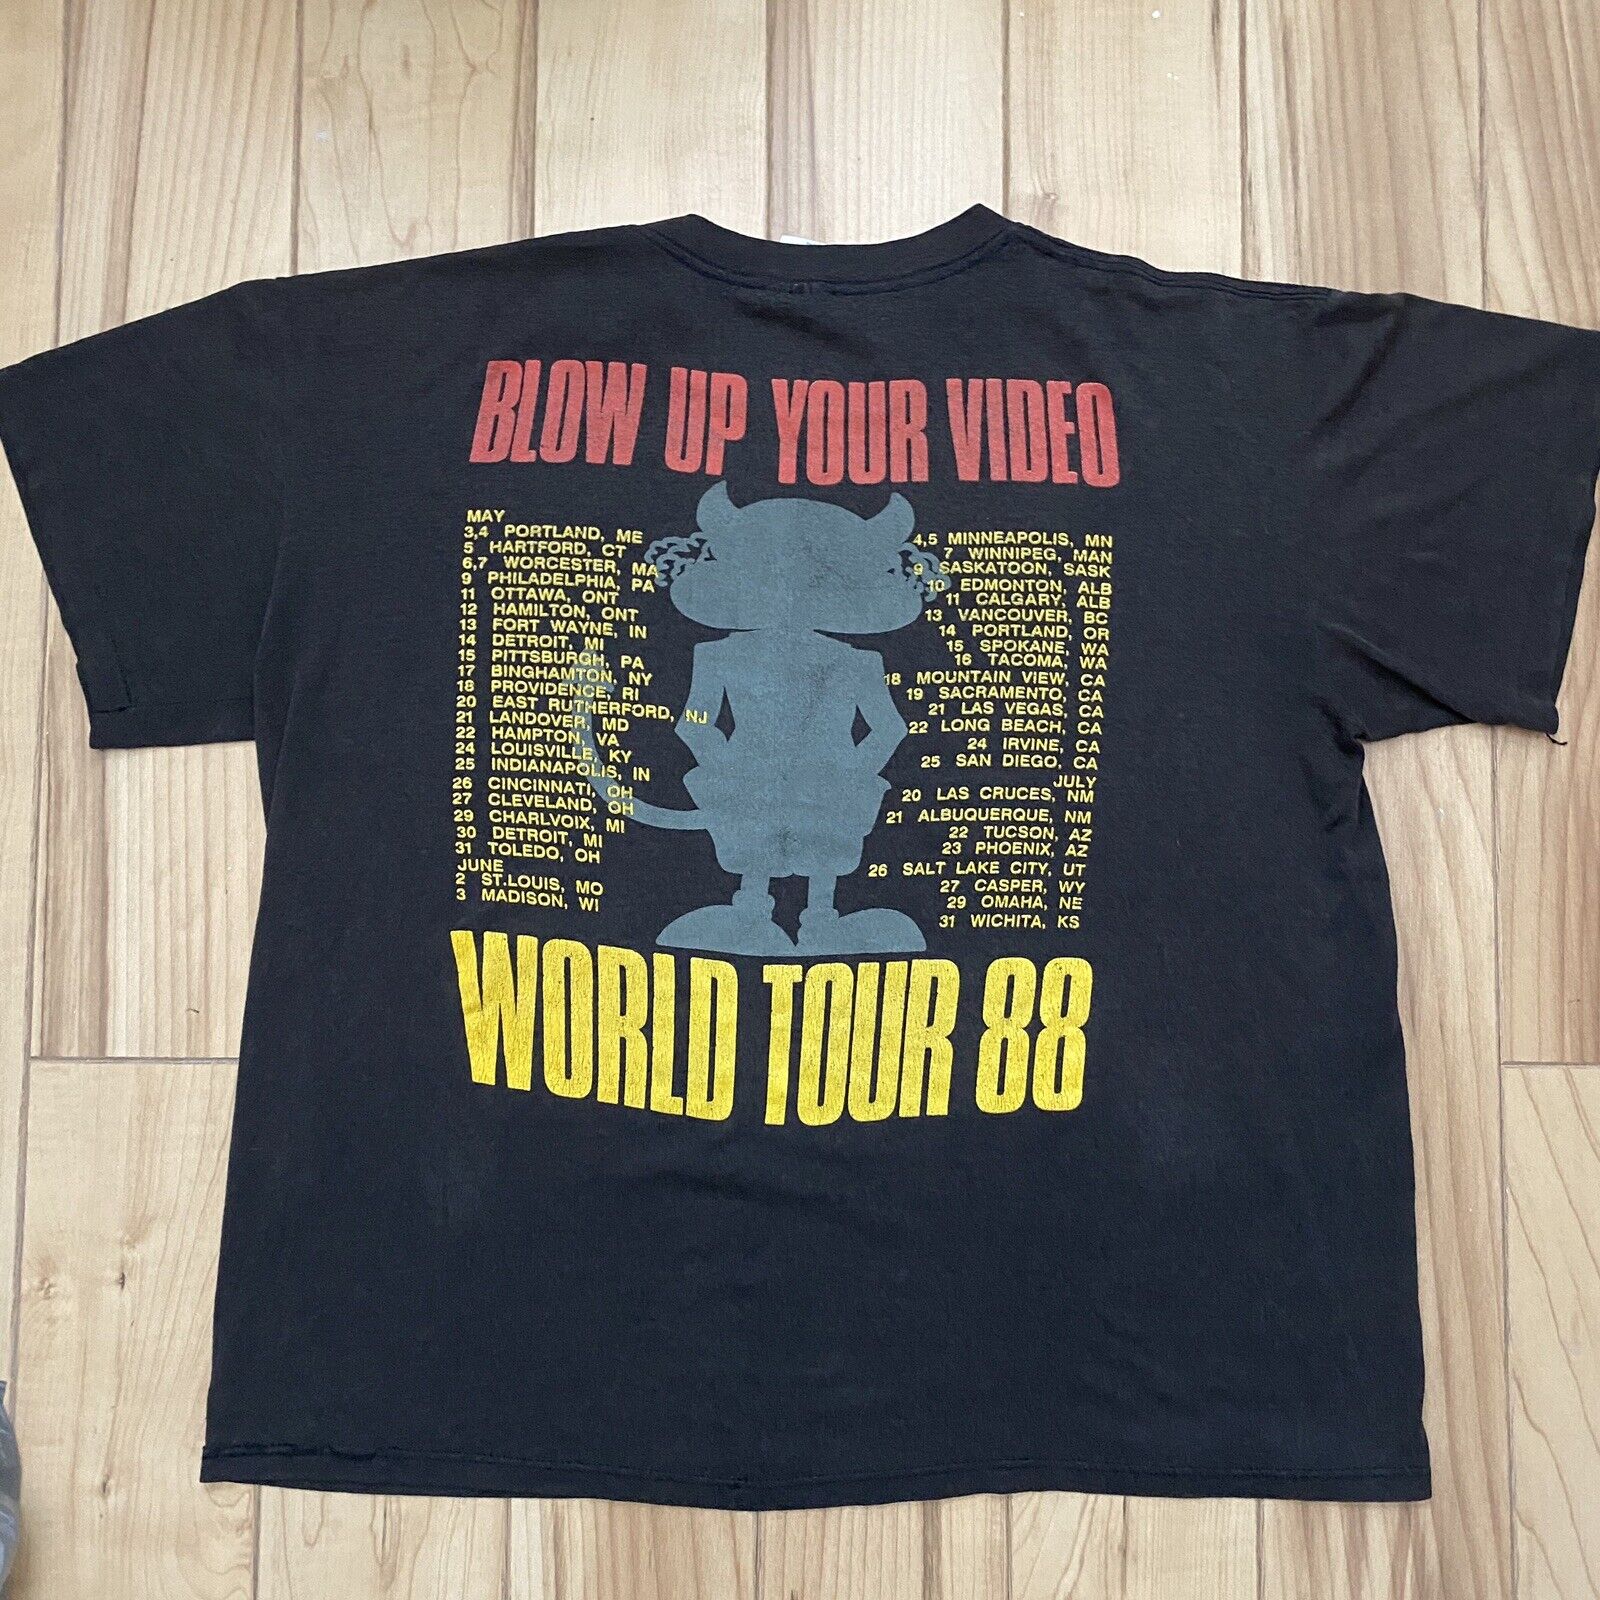 Vintage 1988 ACDC World Tour T Shirt Band Rock Blow Up Your Video Black XL Axel